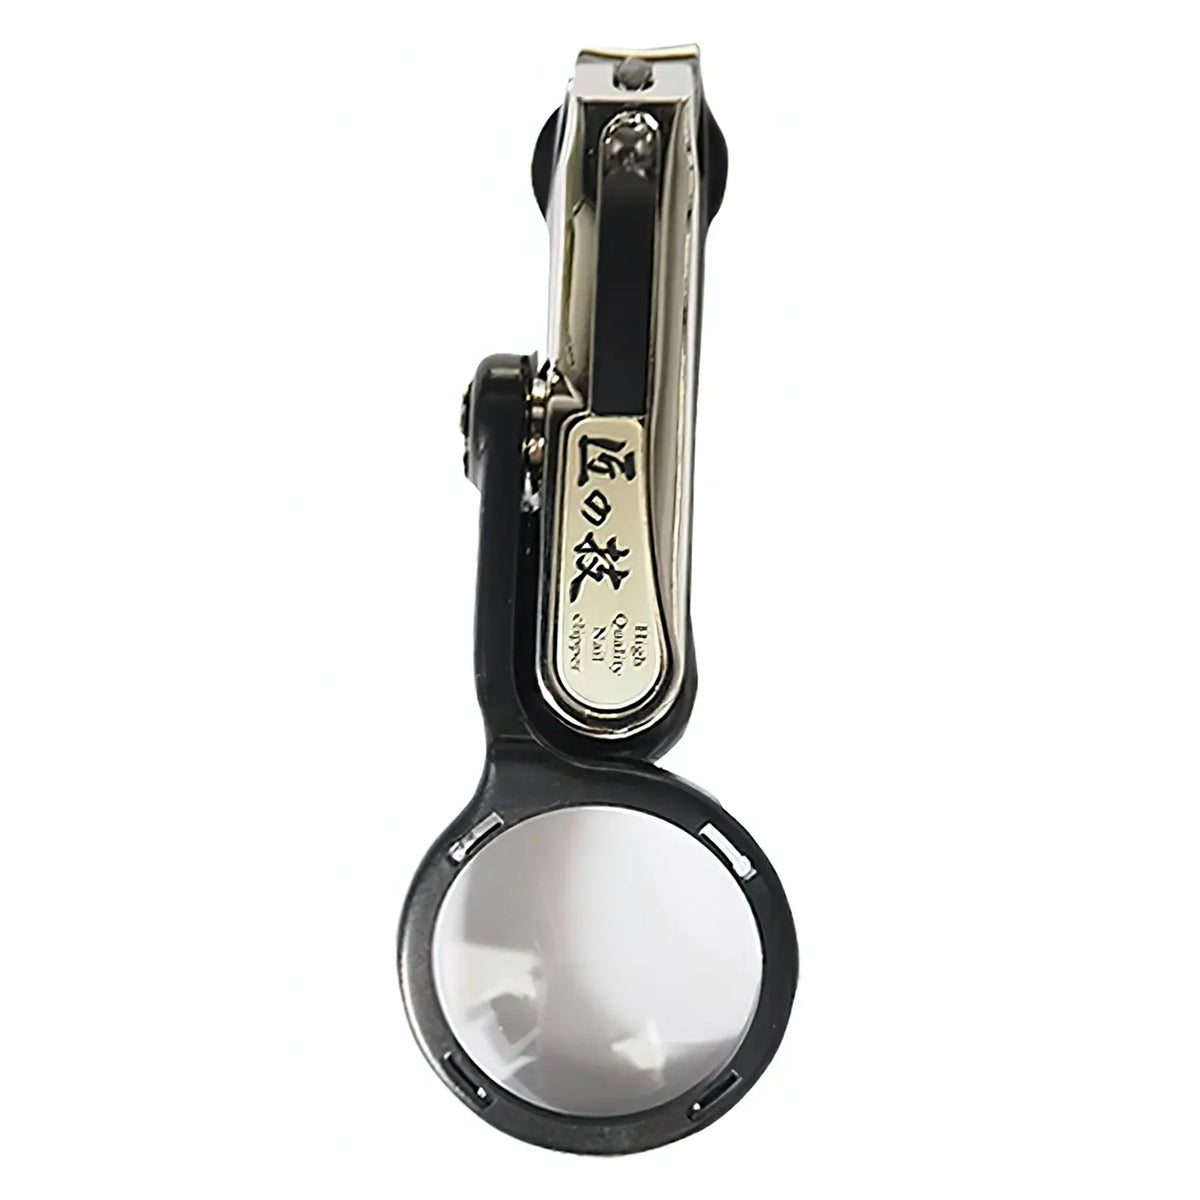 https://www.globalkitchenjapan.com/cdn/shop/files/green-bell-takuminowaza-carbon-steel-nail-clippers-with-magnifier-and-storage-bag-black-g-1223_1_1200x.webp?v=1691387718